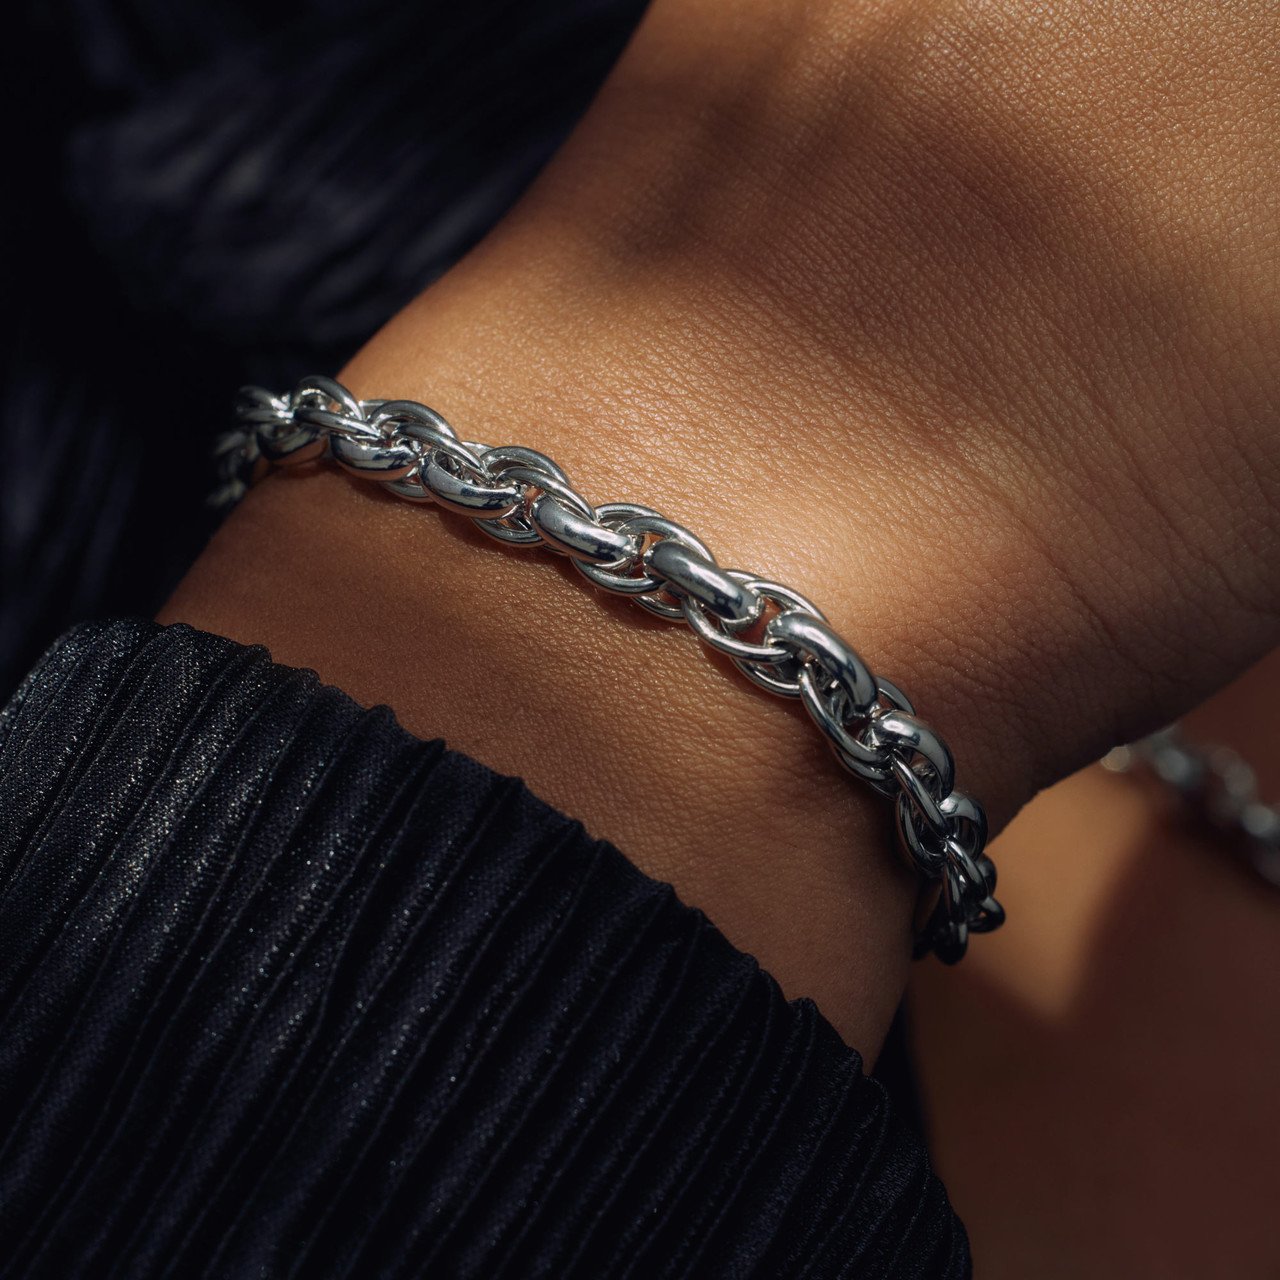 Find Your Perfect Silver Bracelet - From Delicate to Bold Designs